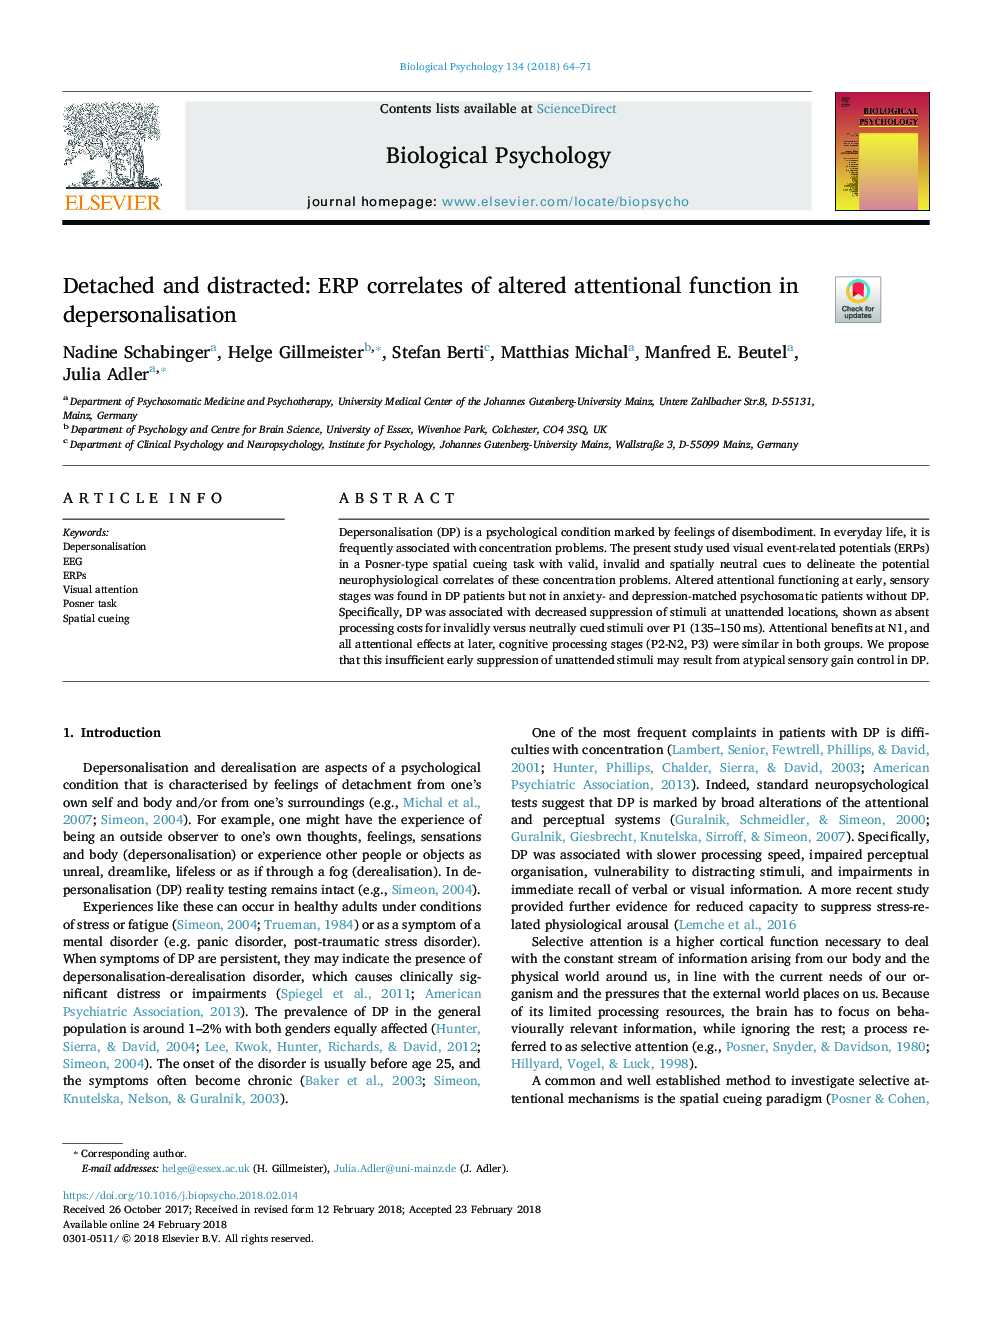 Detached and distracted: ERP correlates of altered attentional function in depersonalisation